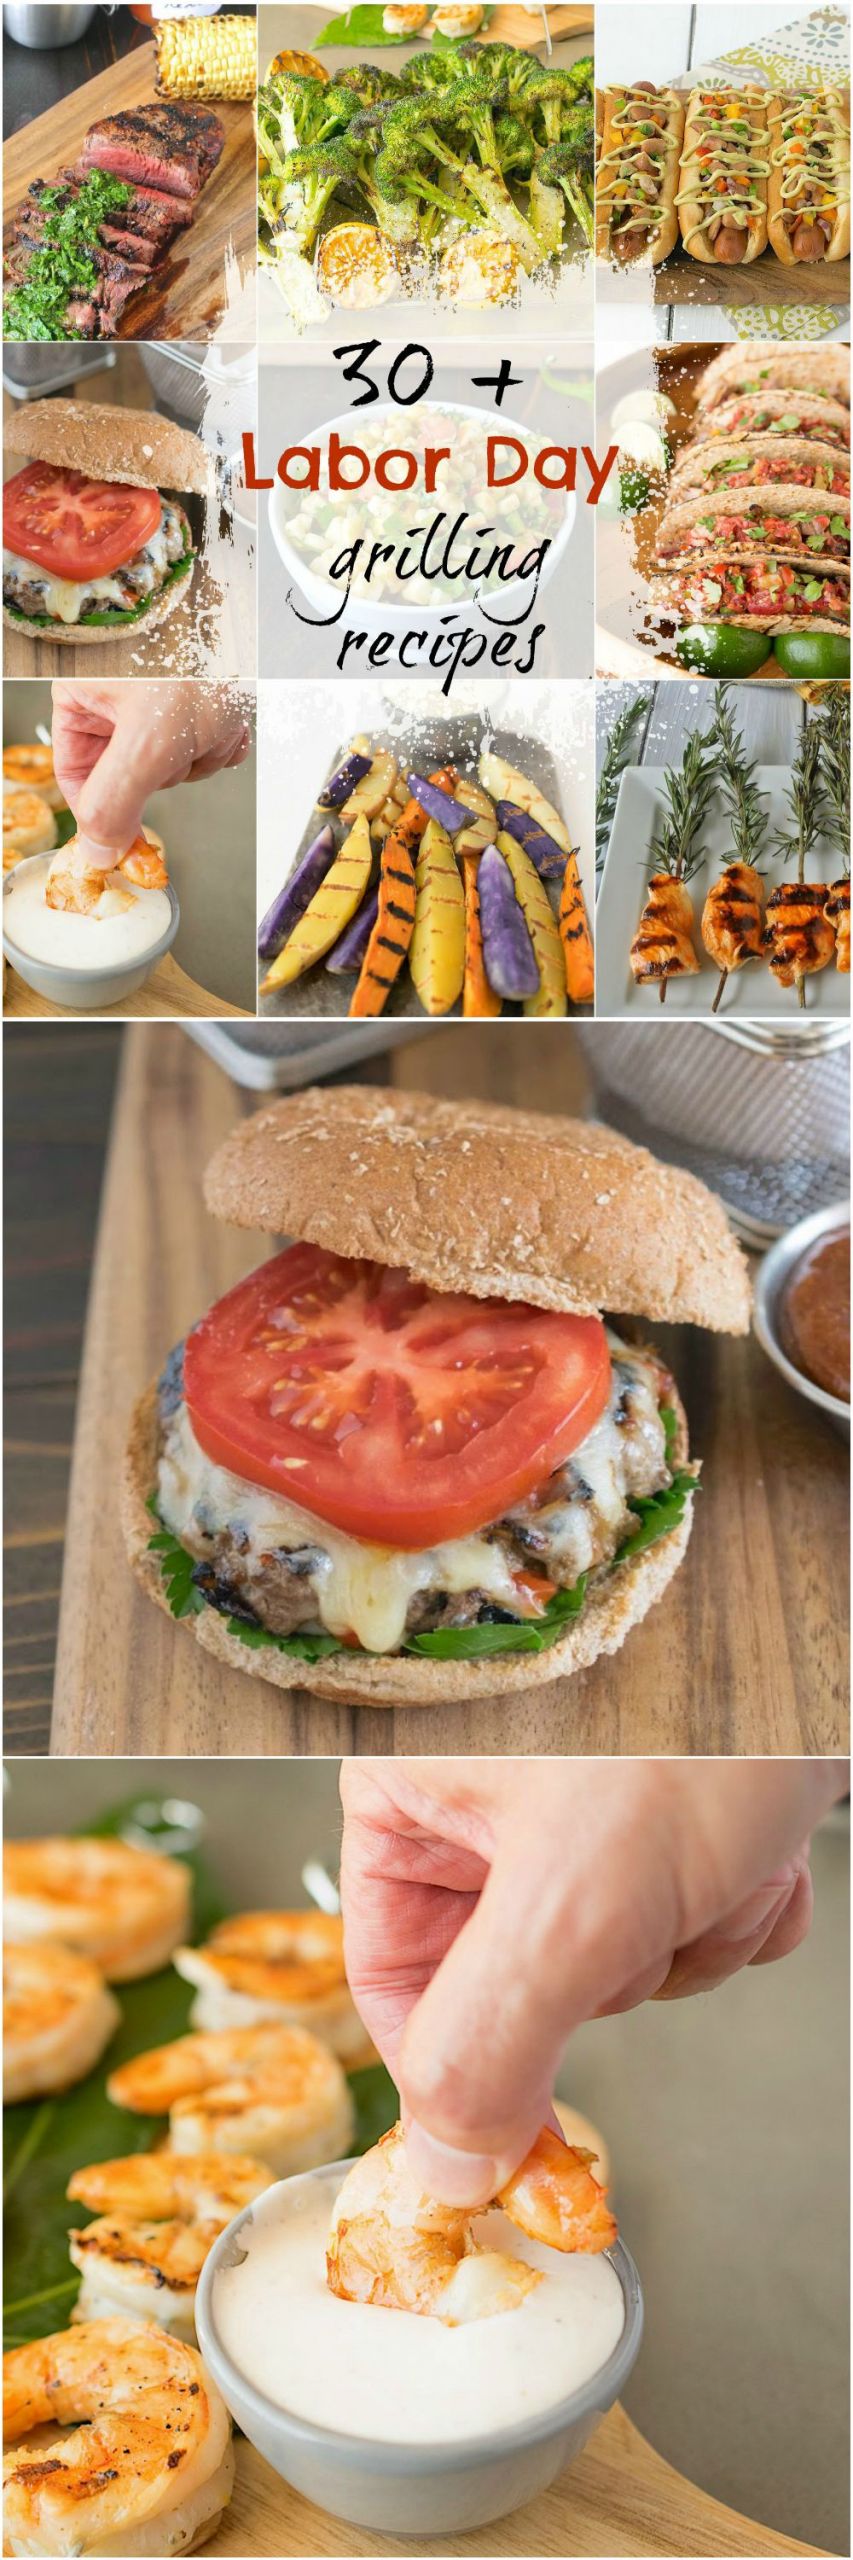 Labor Day Bbq Ideas
 30 Labor Day grilling recipes Culinary Ginger